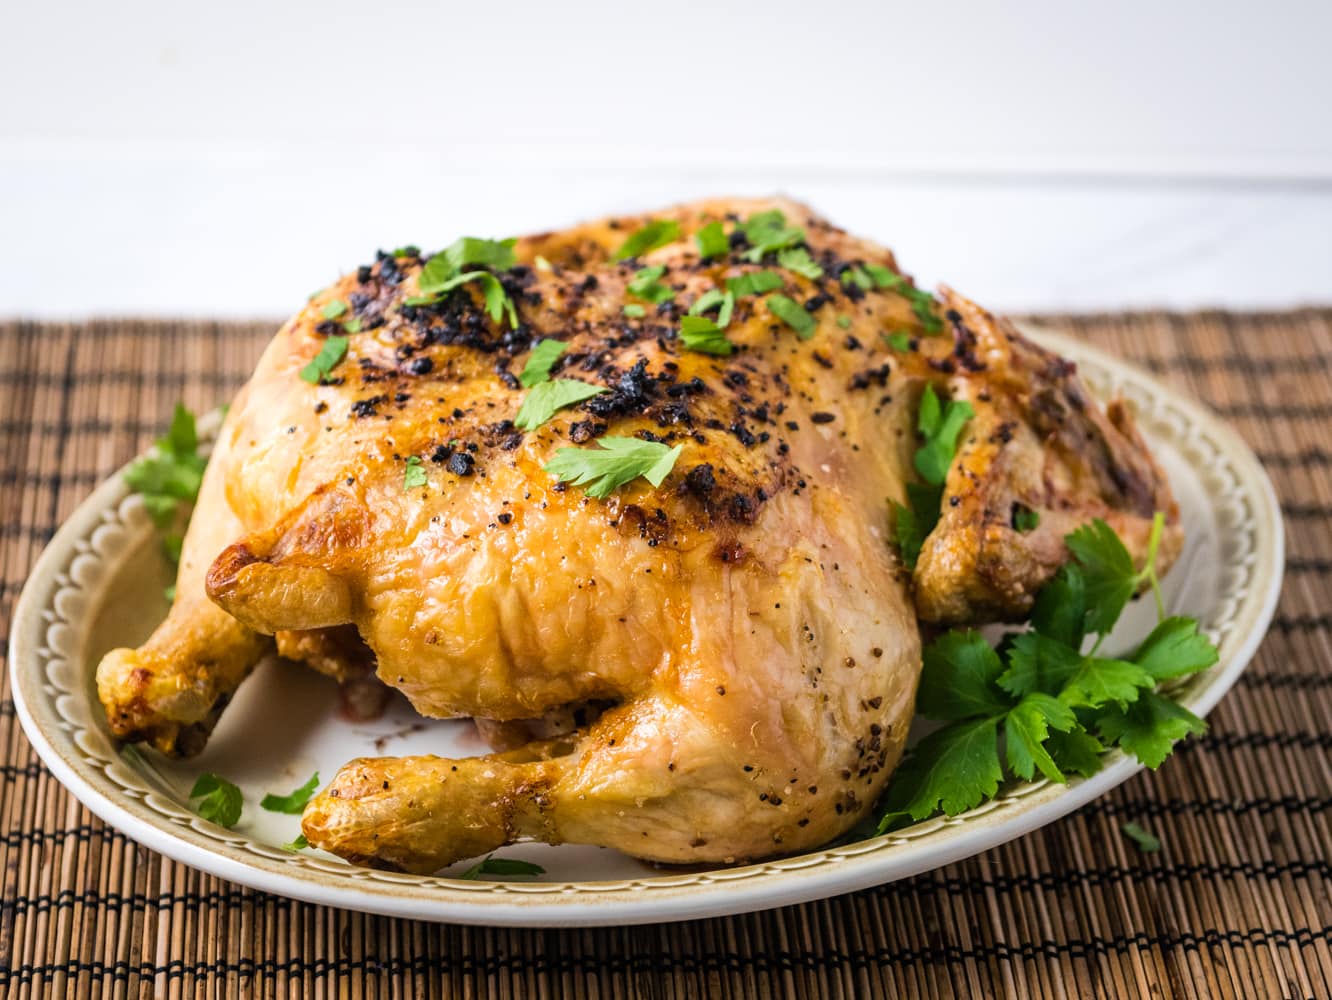 Whole chicken cooked in the air fryer with lemon and herbs.